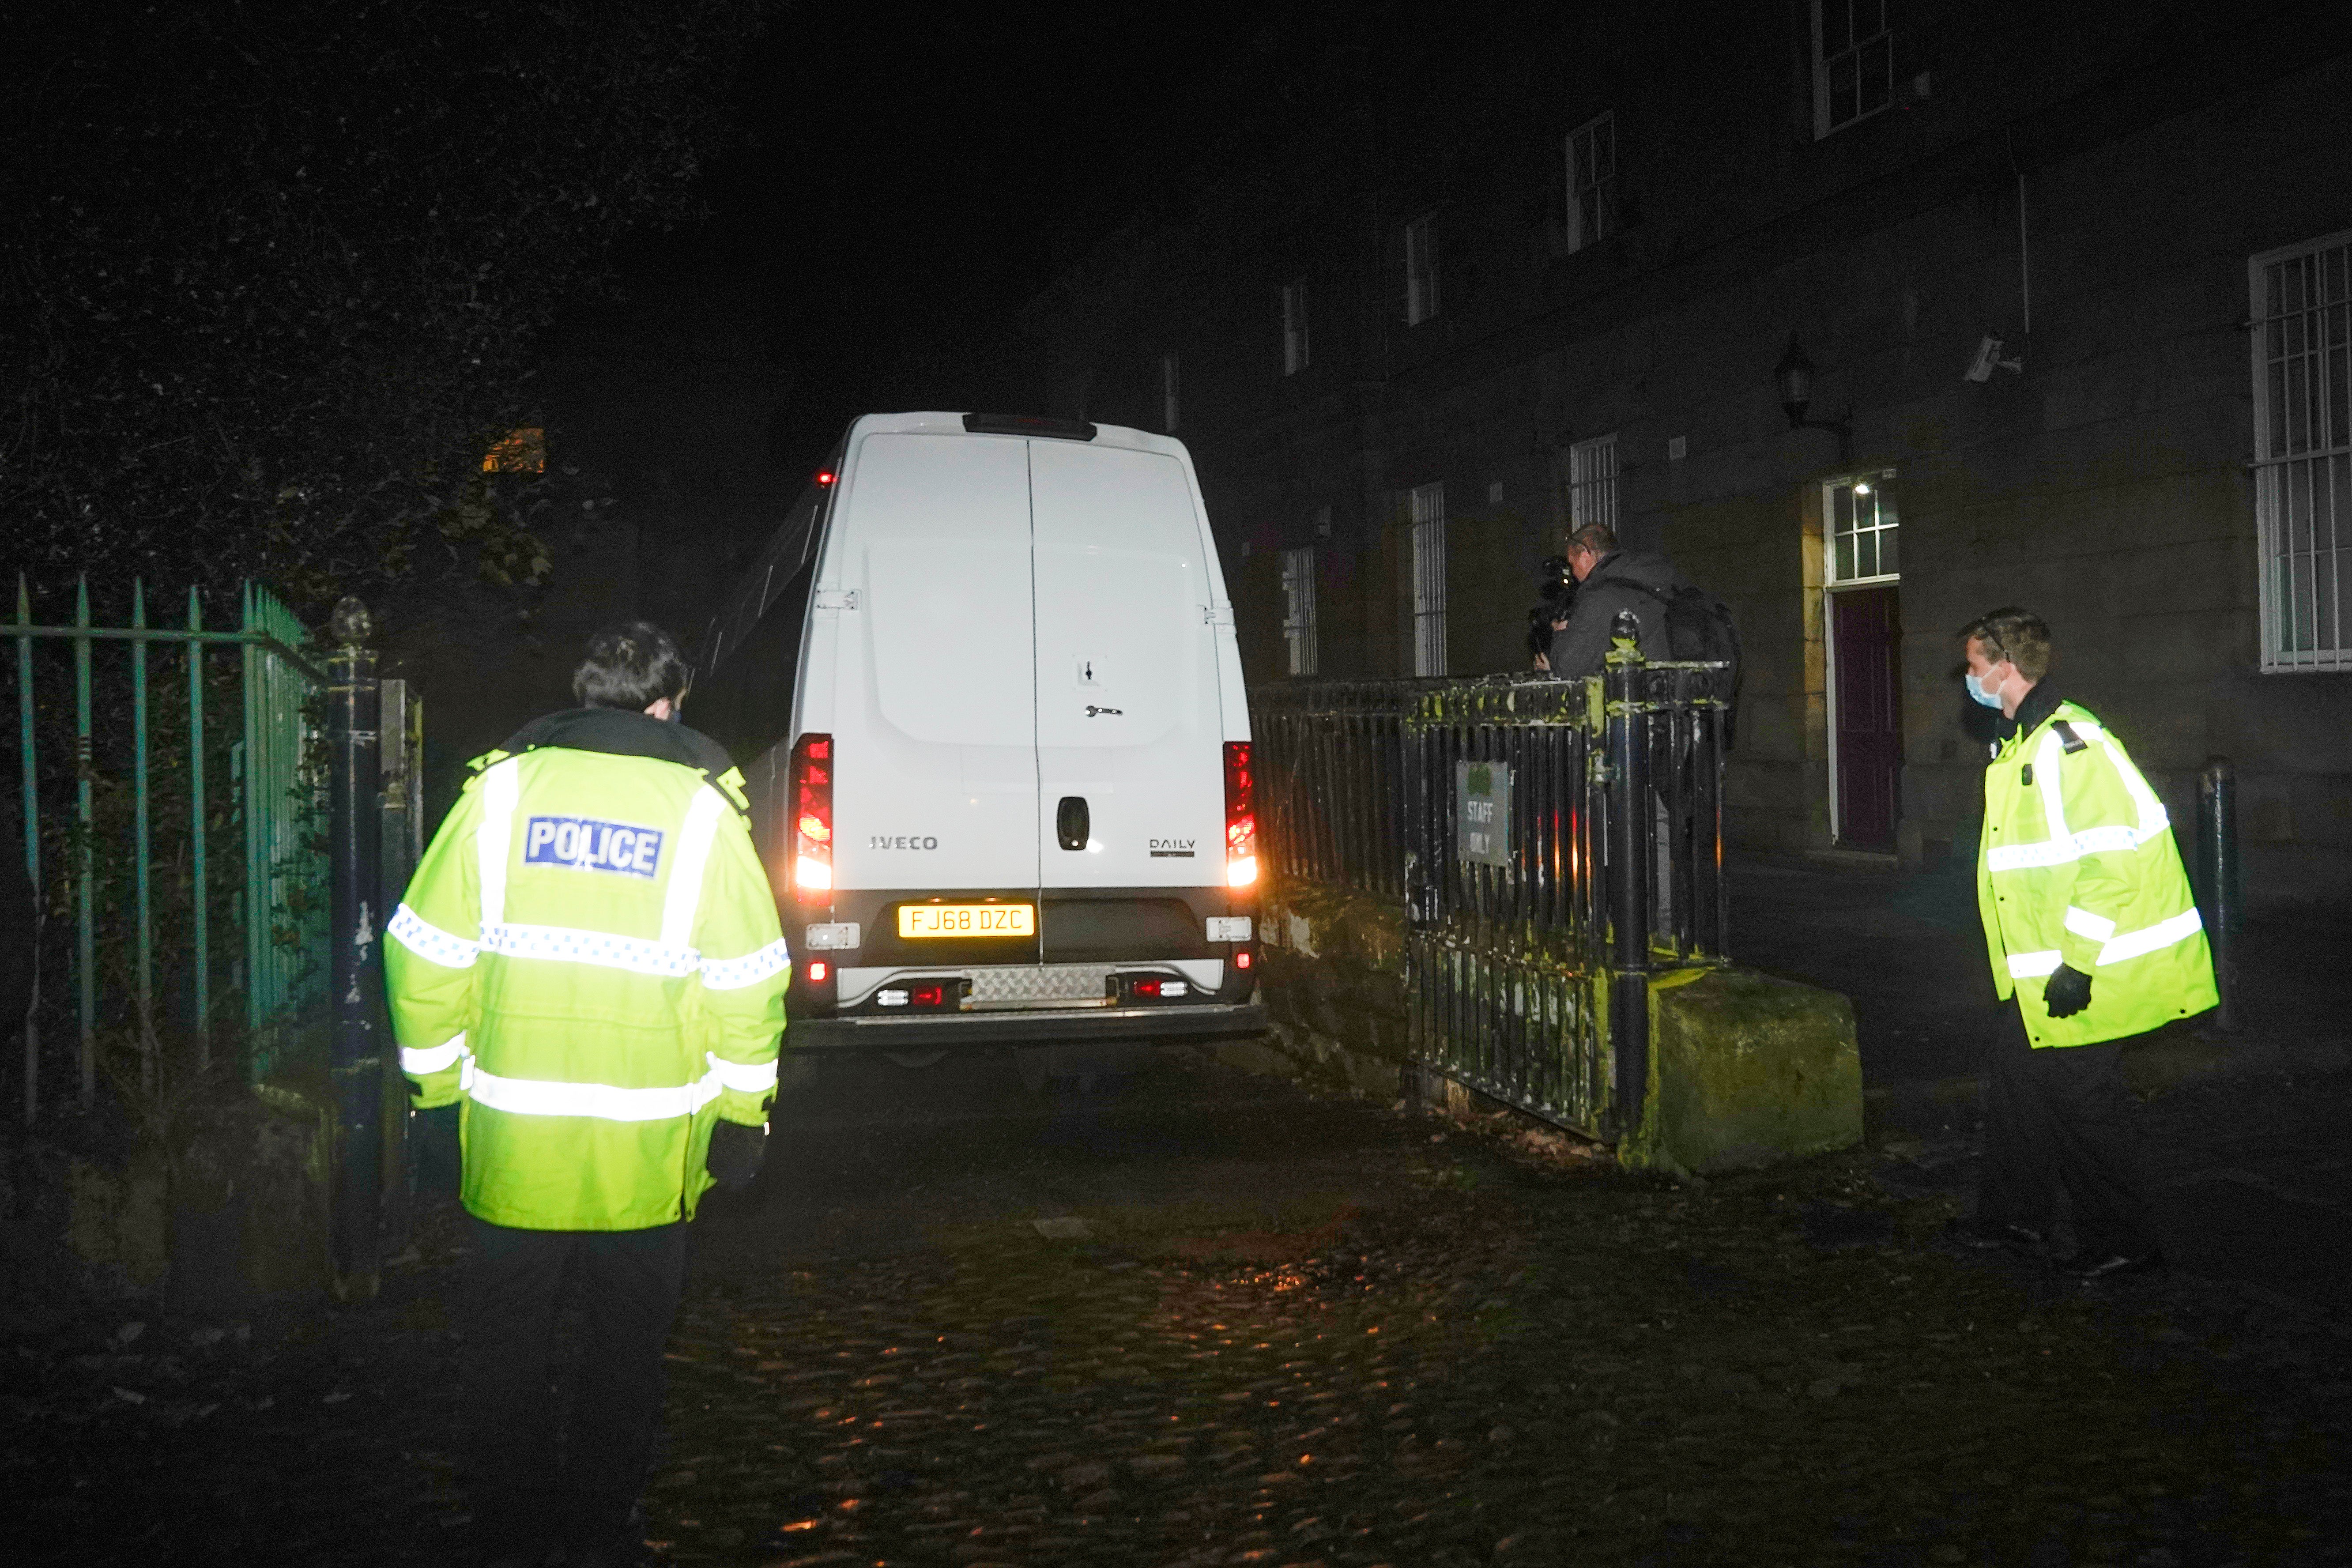 A prison van believed to contain Letby leaves Chester Crown Court on 13 November 2020